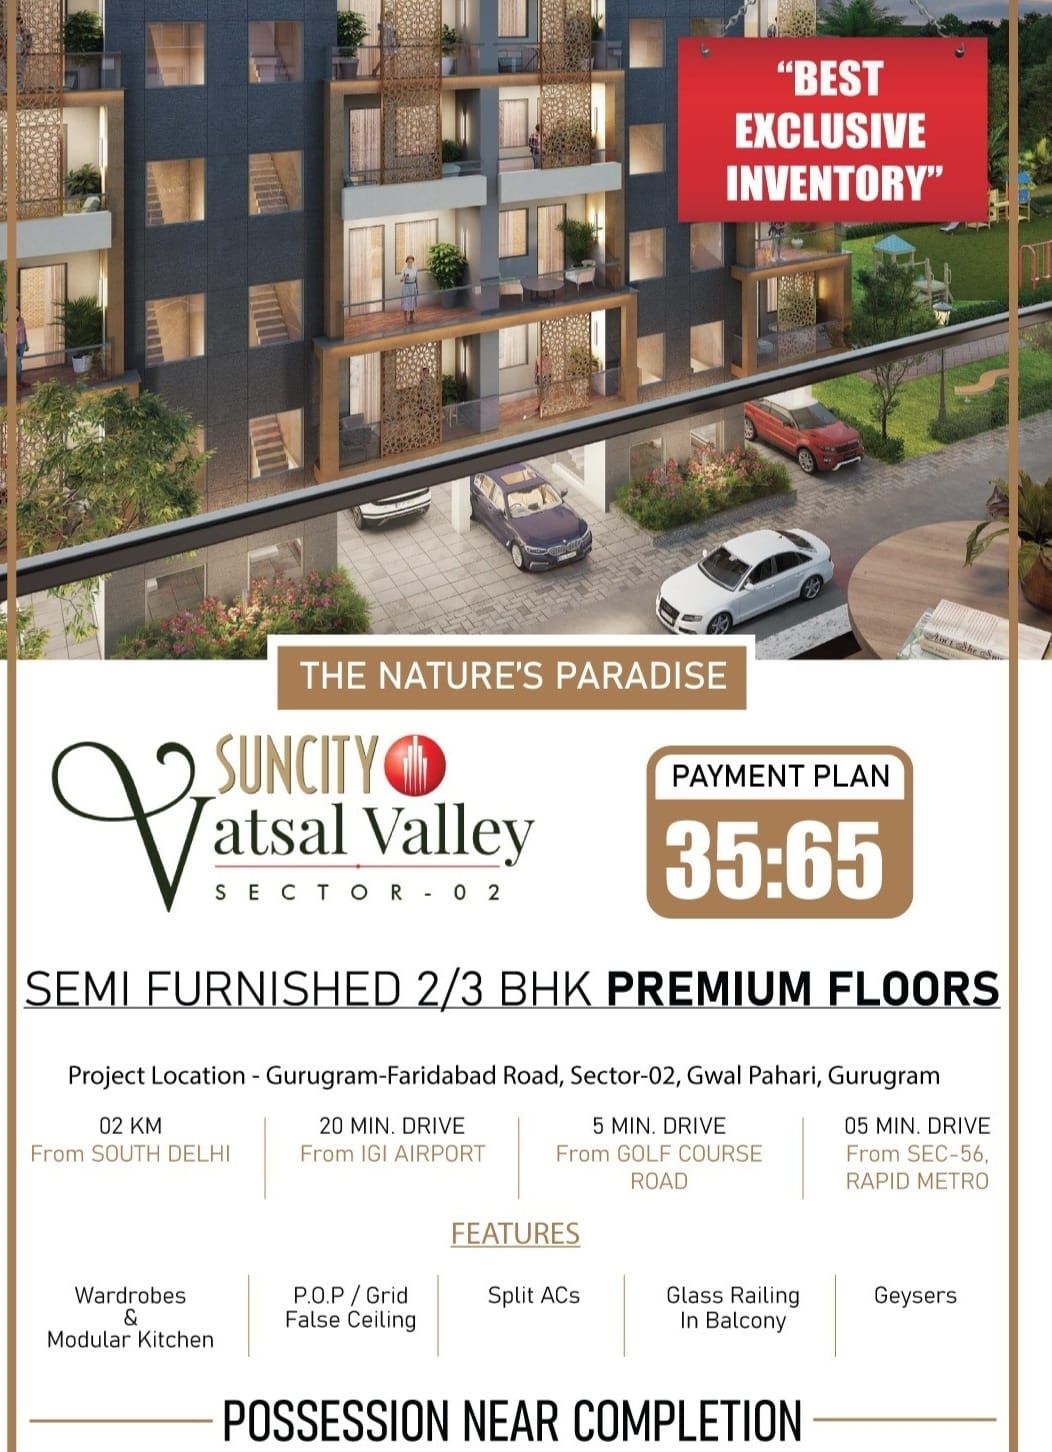 Best exclusive inventory at Suncity Vatsal Valley in Sector 2, Gurgaon